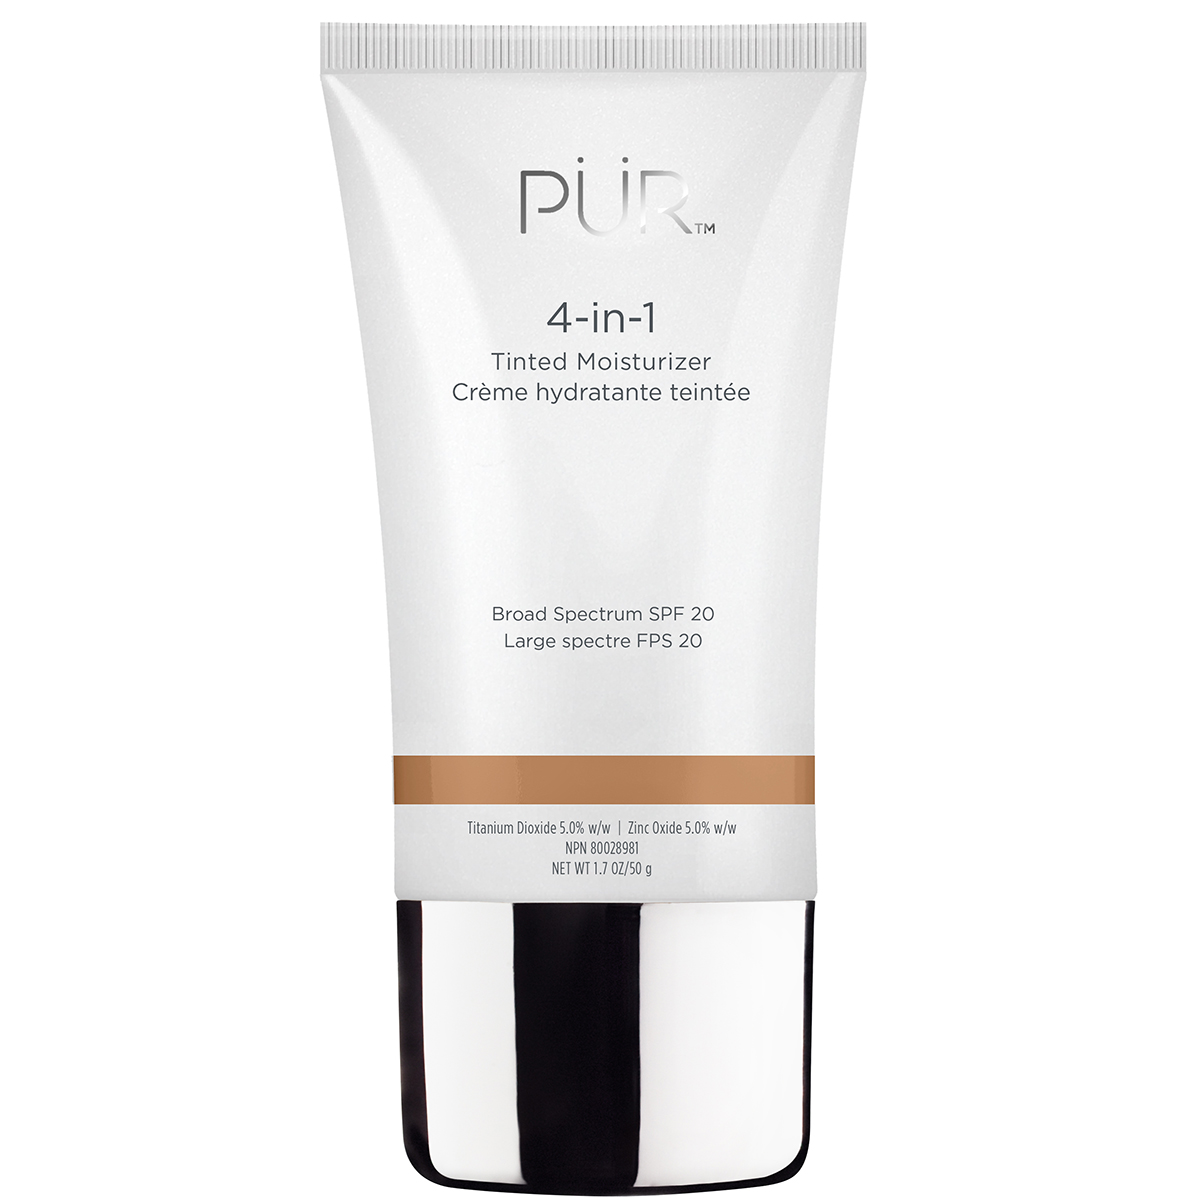 Pur 4-in-1 Mineral Tinted Moisturizer